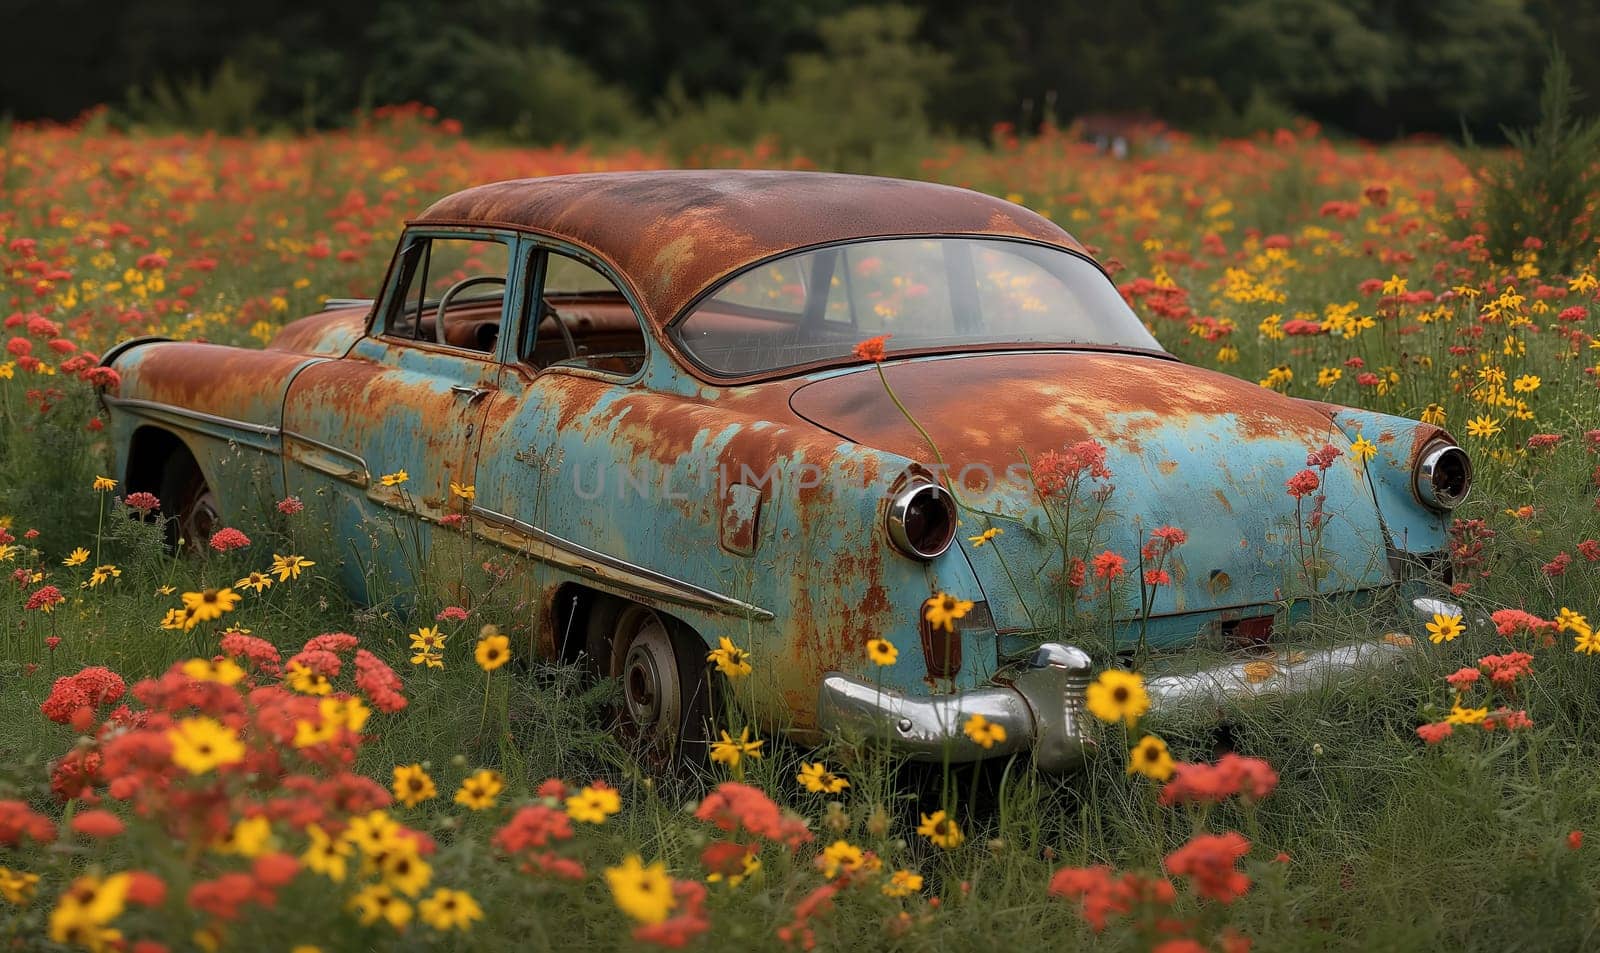 An old red car in a field surrounded by flowers. by Fischeron